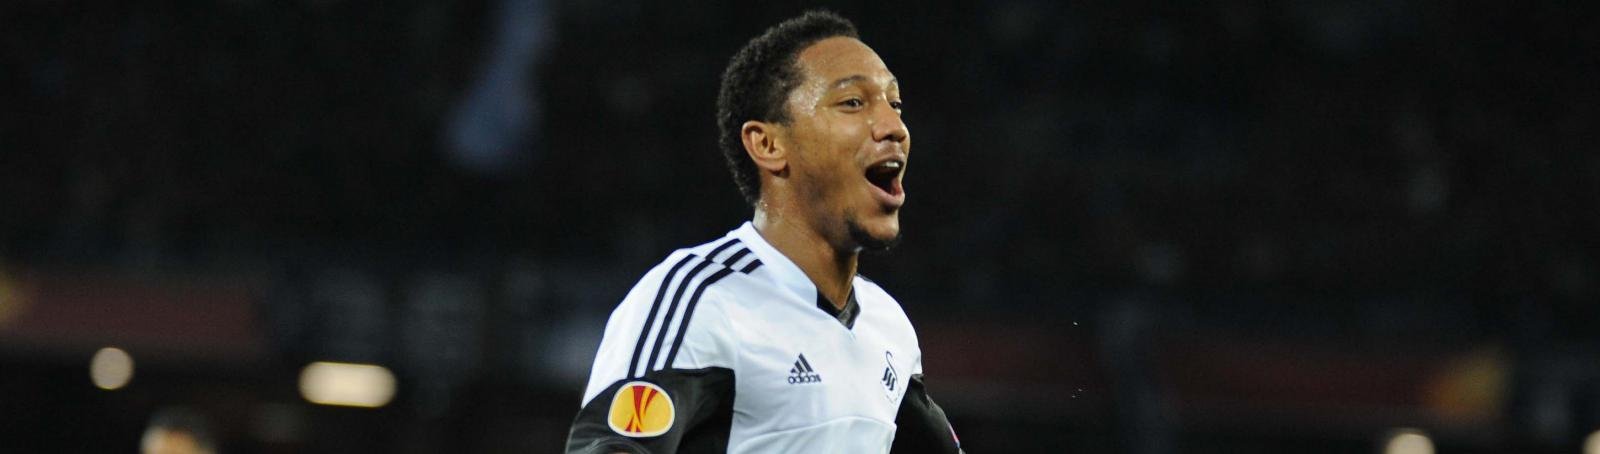 Swansea City set to welcome back 2014 World Cup star